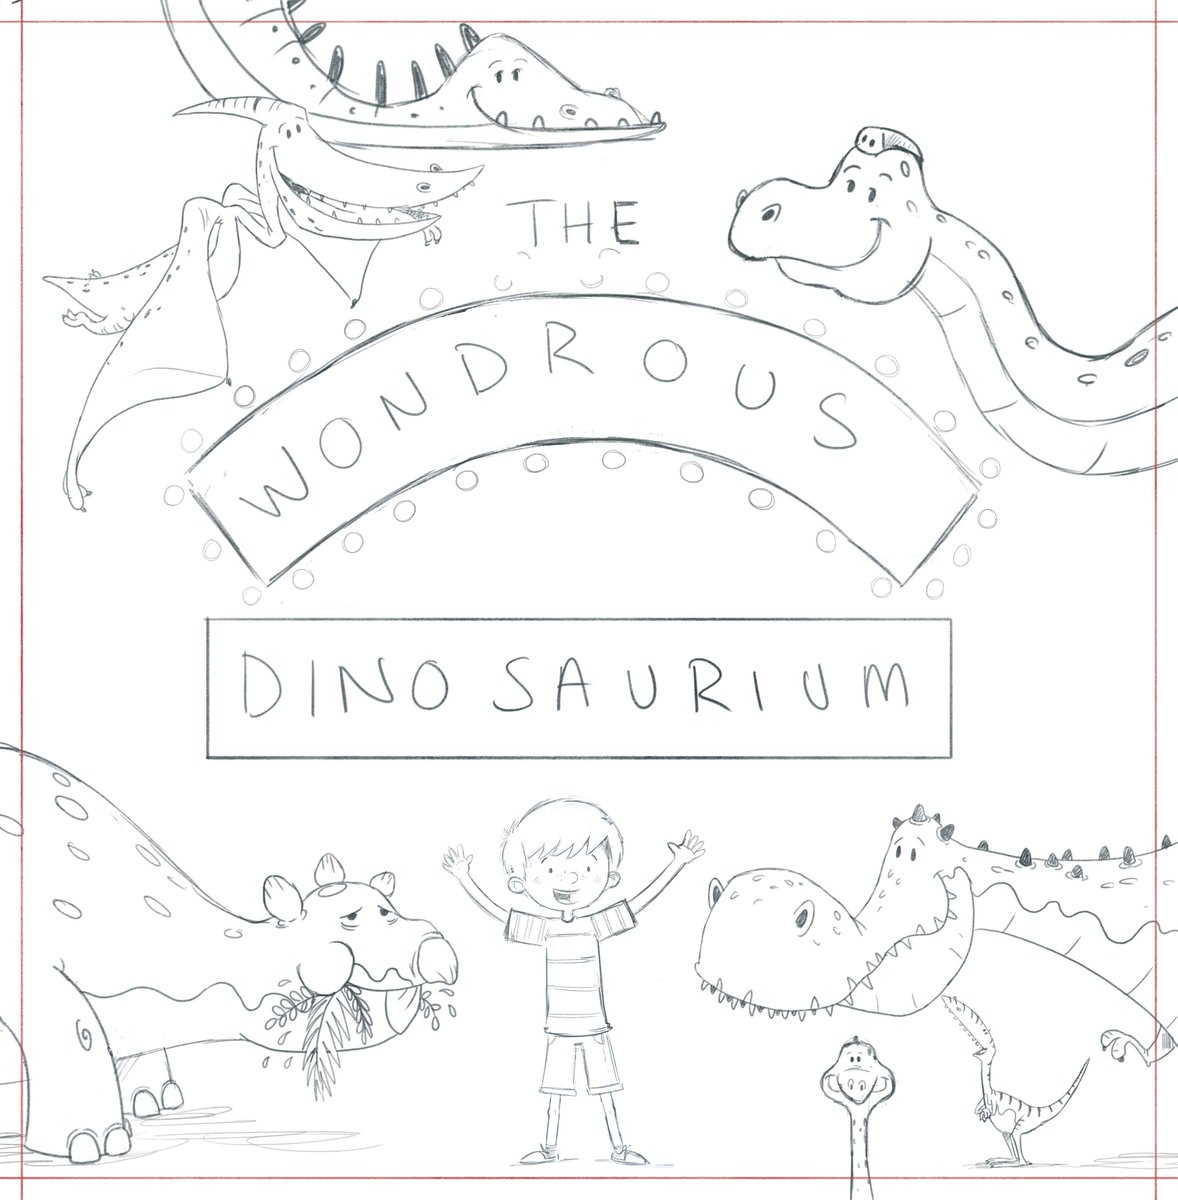 been updating the website, some new sketches and images and  Blog updates, one sharing the roughs and development of #Thewondrousdinosaurium @maverickbooks @BrightAgencyUK @John_Condon_OTT #bookroughs #characterdesign #picturebooks #childrensillustration
stevebrownillustration.co.uk/blog